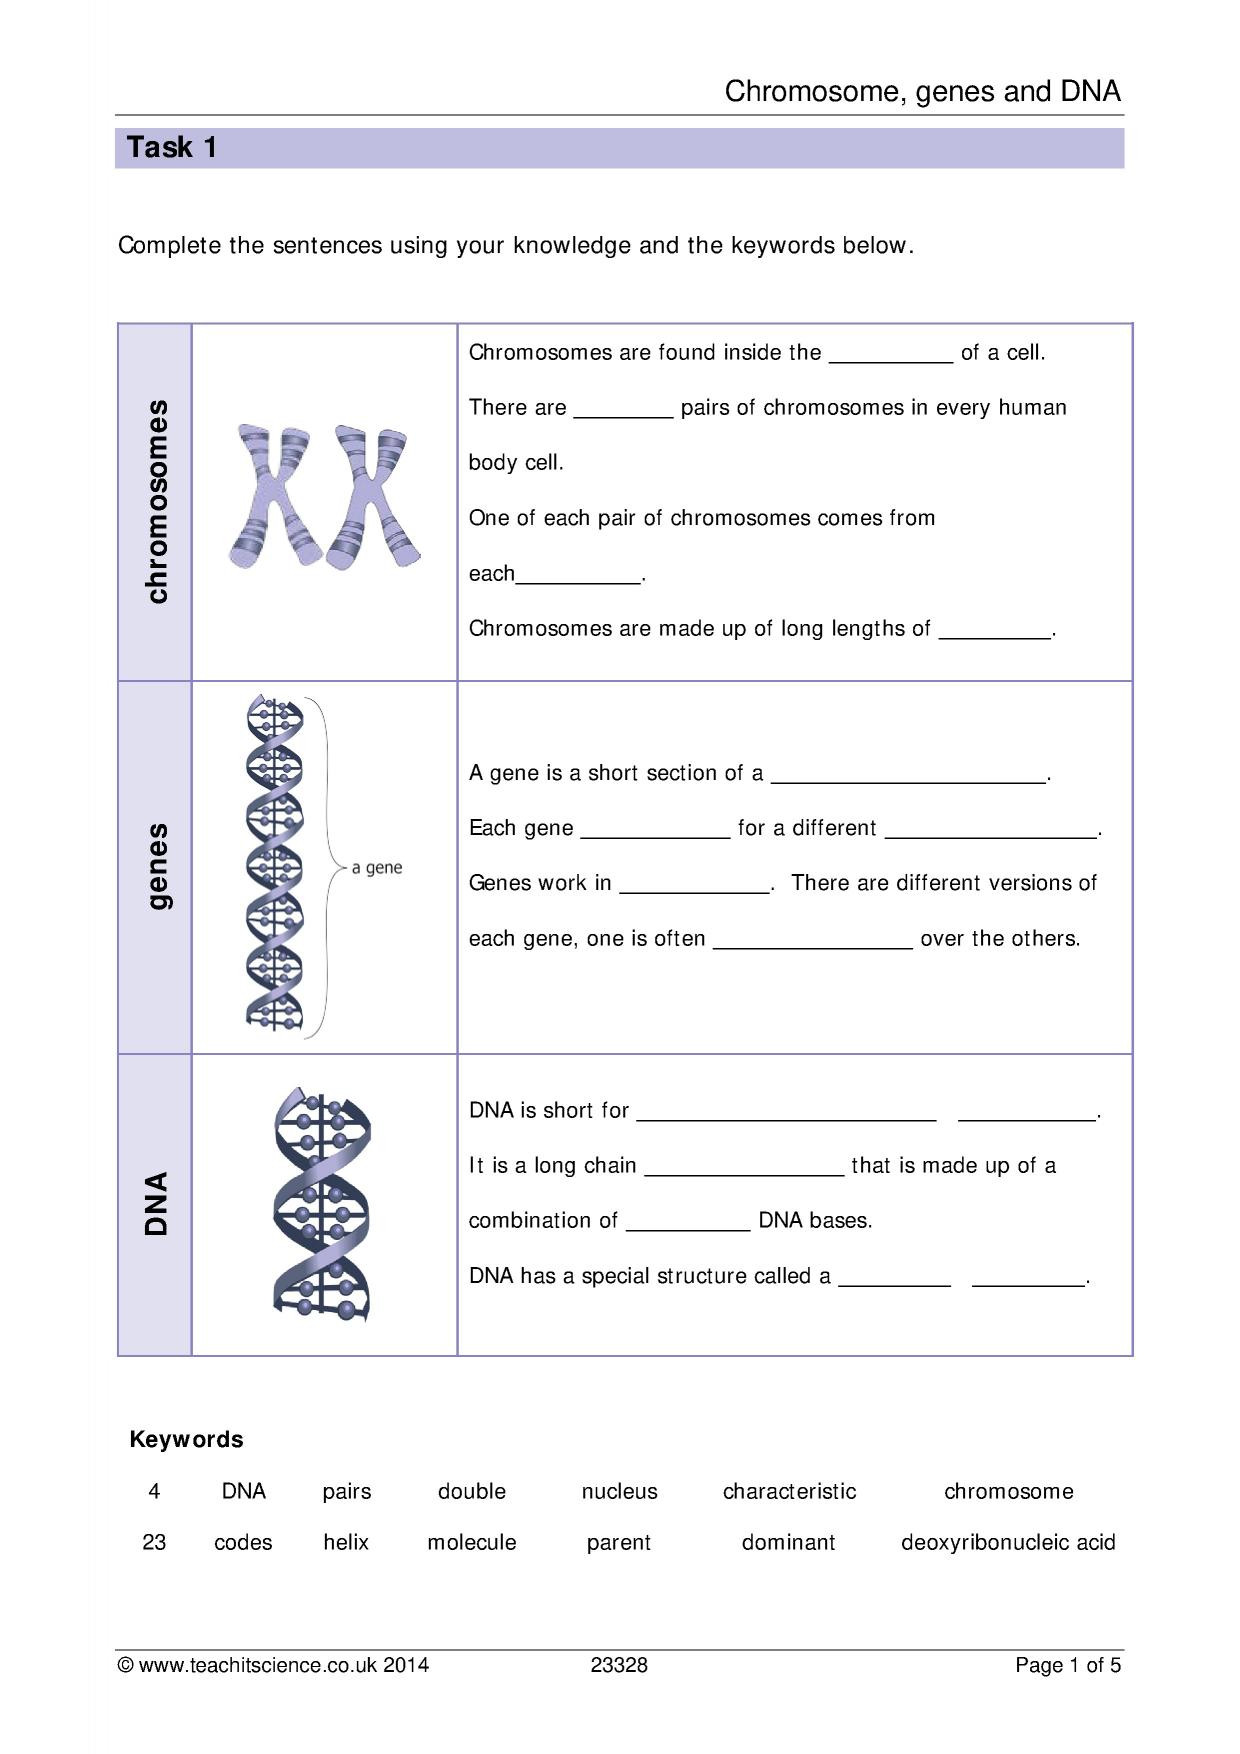 Genetics Worksheet Middle School Chromosomes Genes and Dna Worksheet with Answers